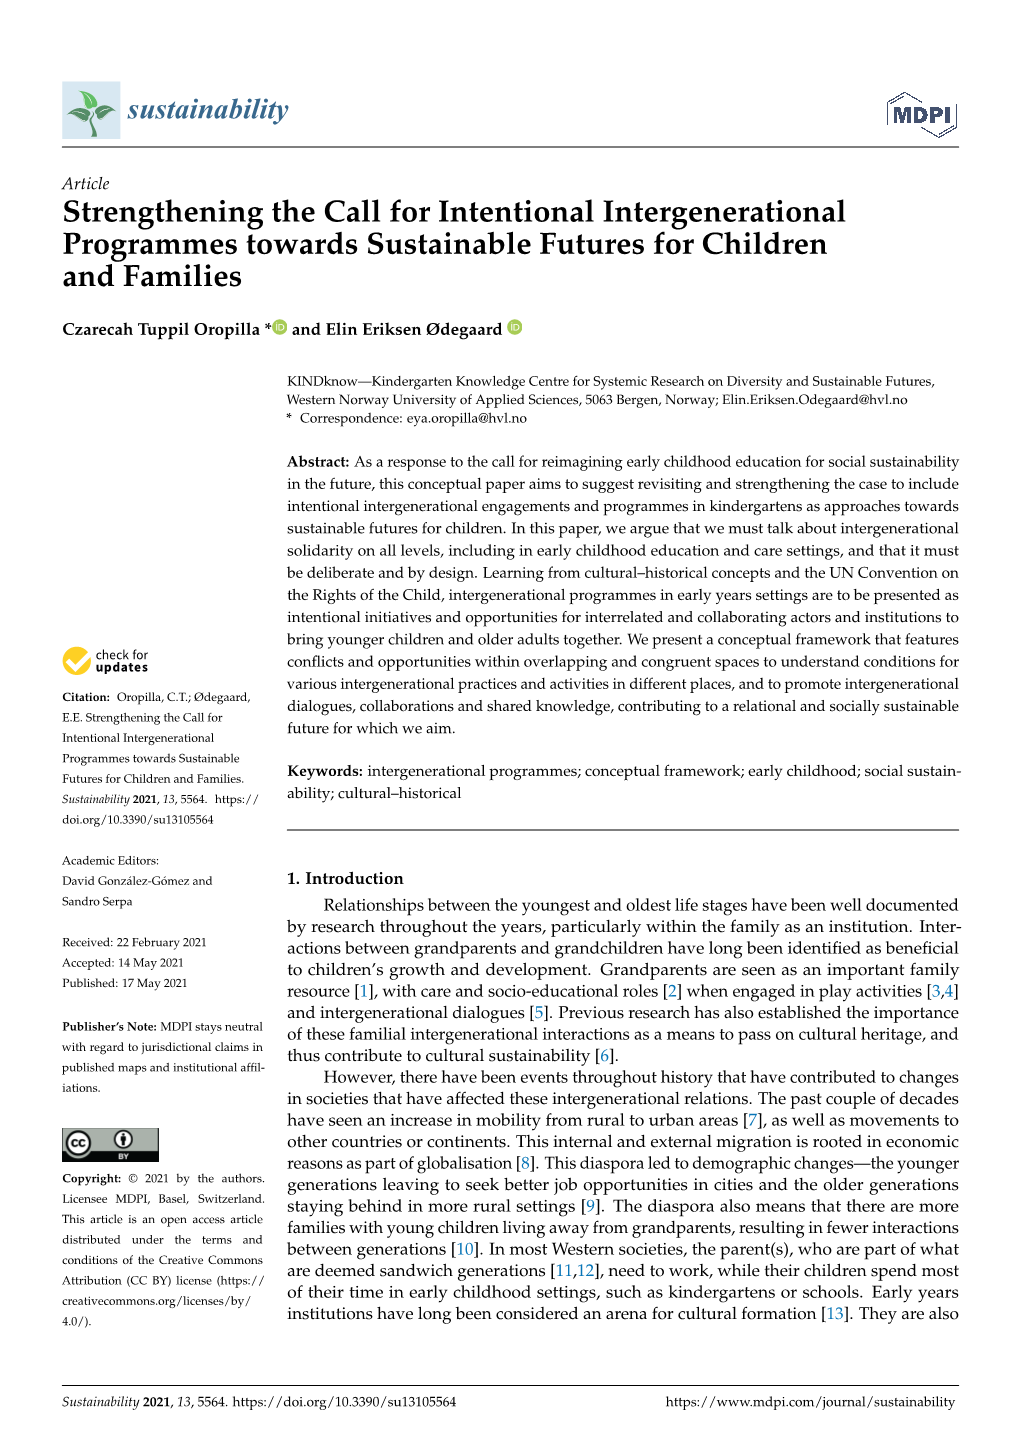 Strengthening the Call for Intentional Intergenerational Programmes Towards Sustainable Futures for Children and Families